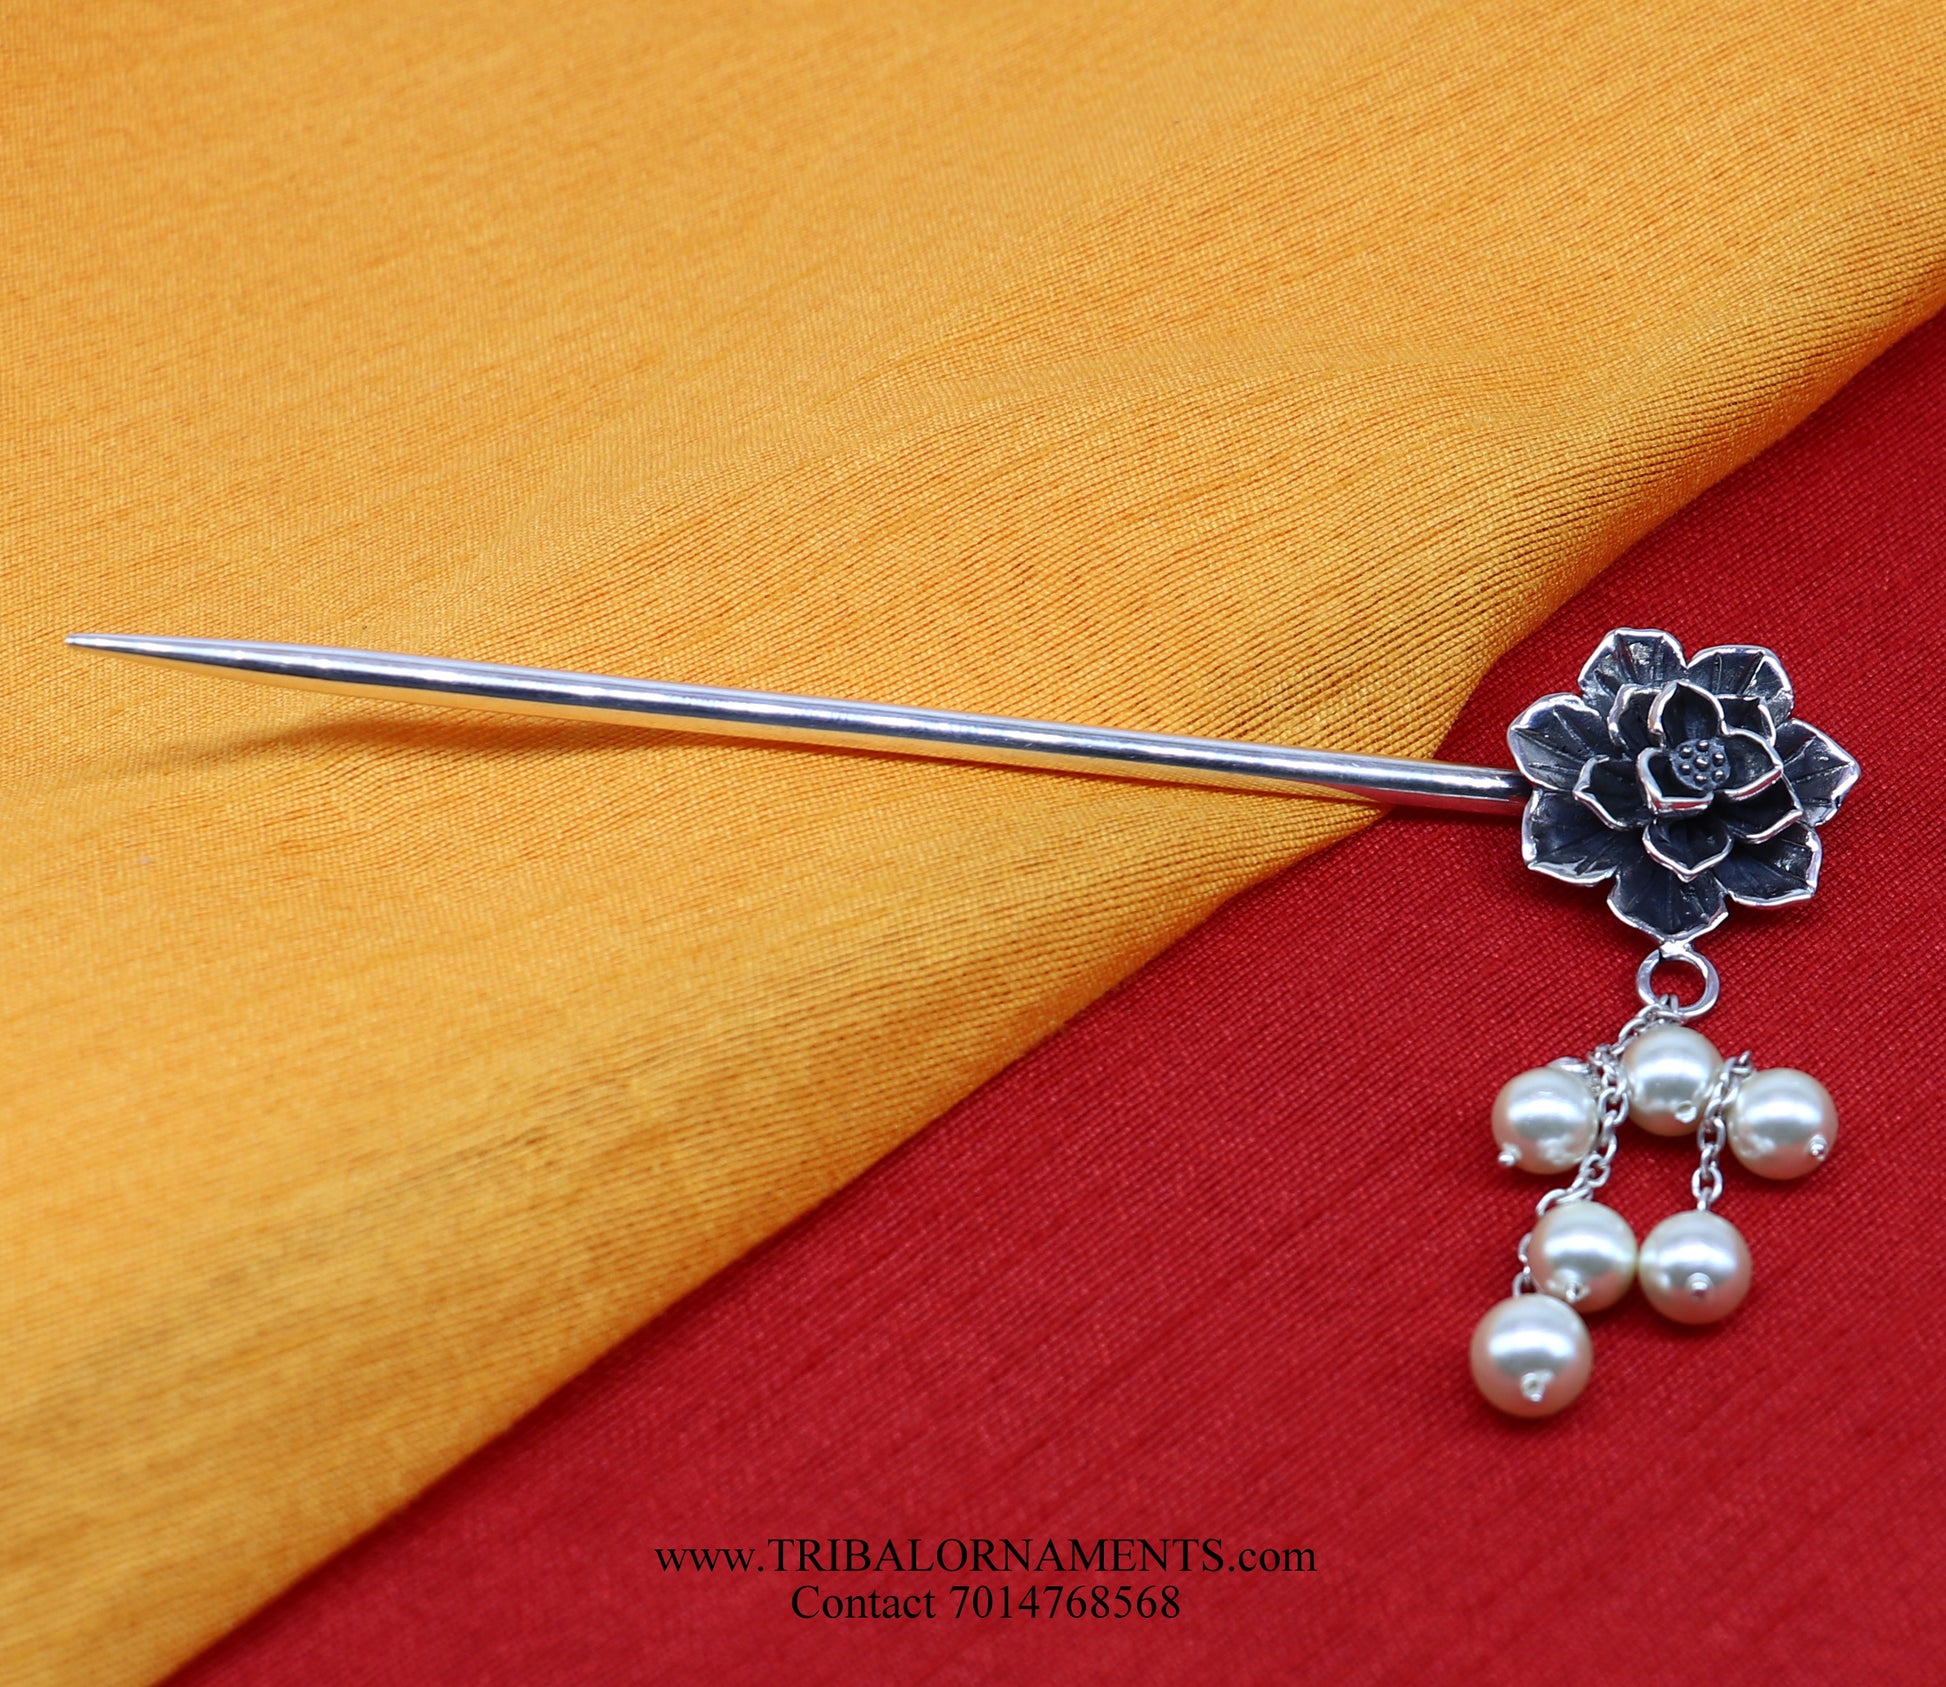 Sterling Silver Hairpin Juda Pin Floral pattern for Women 92.5 Pure and Certified HC05 - TRIBAL ORNAMENTS